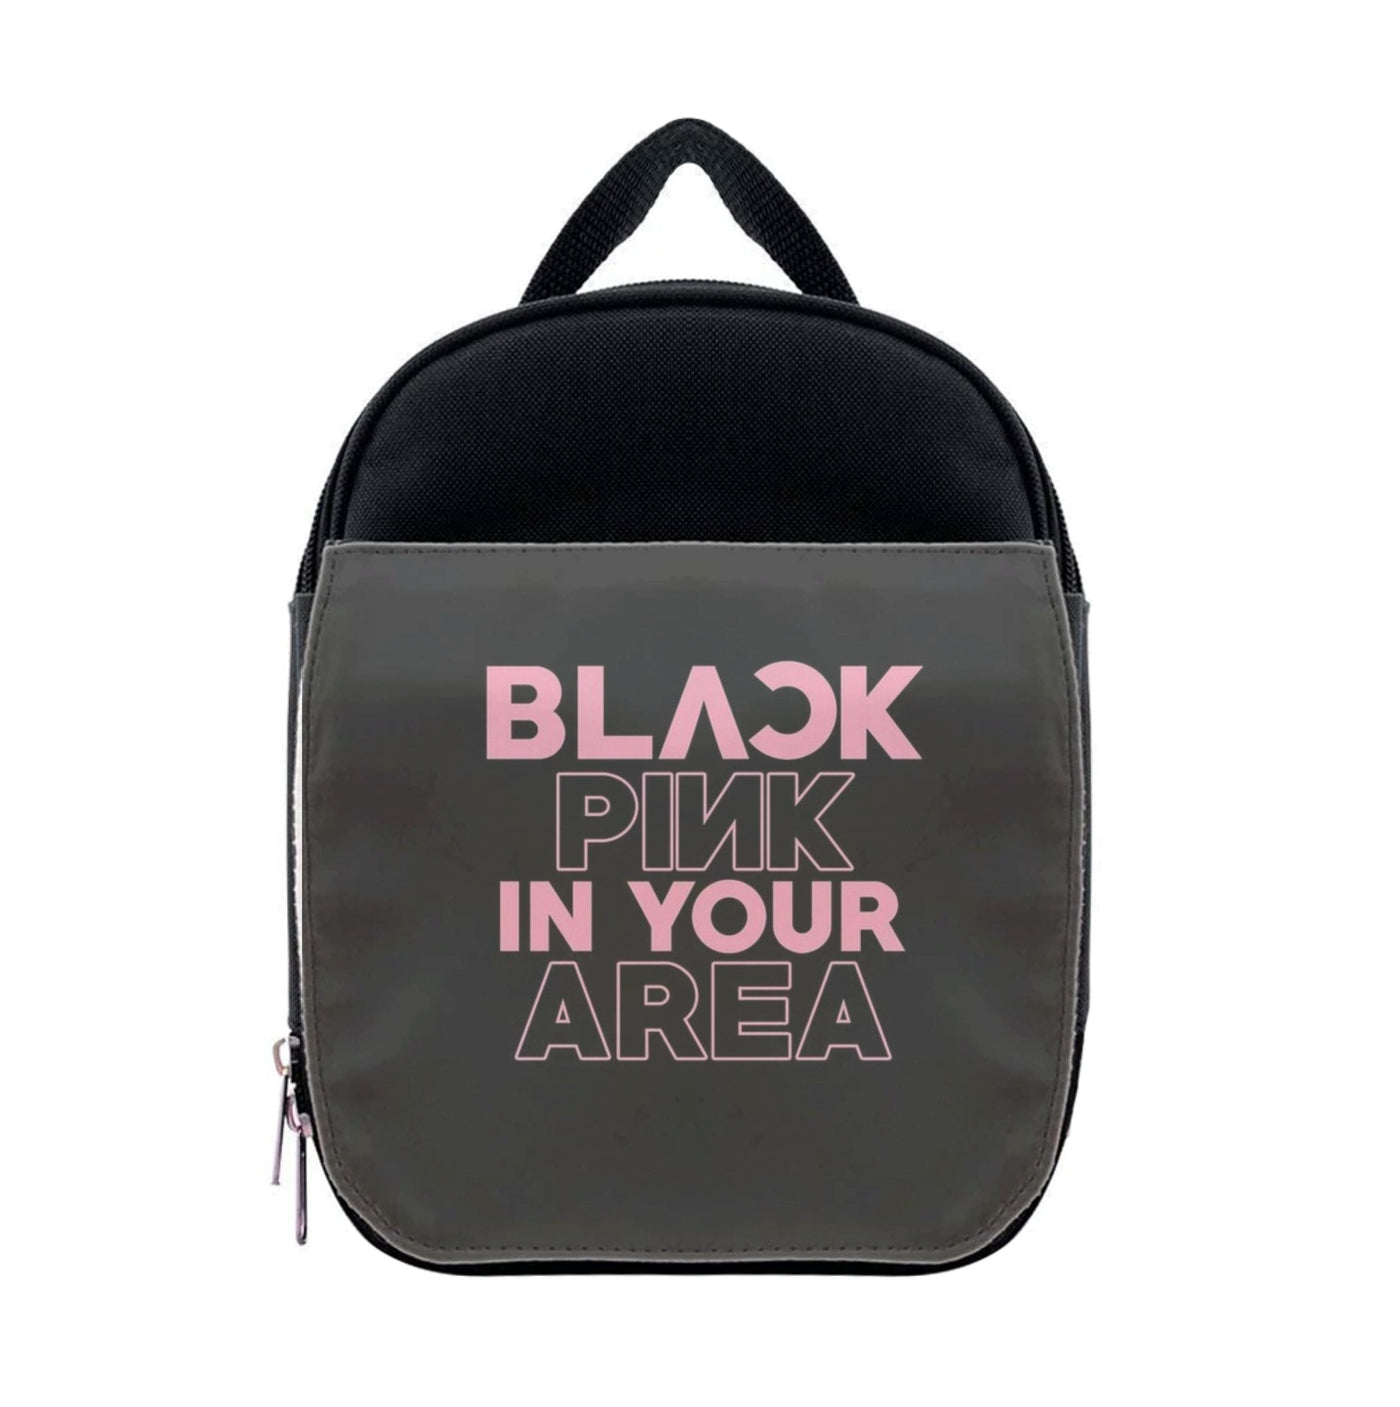 Blackpink In Your Area - Black Lunchbox